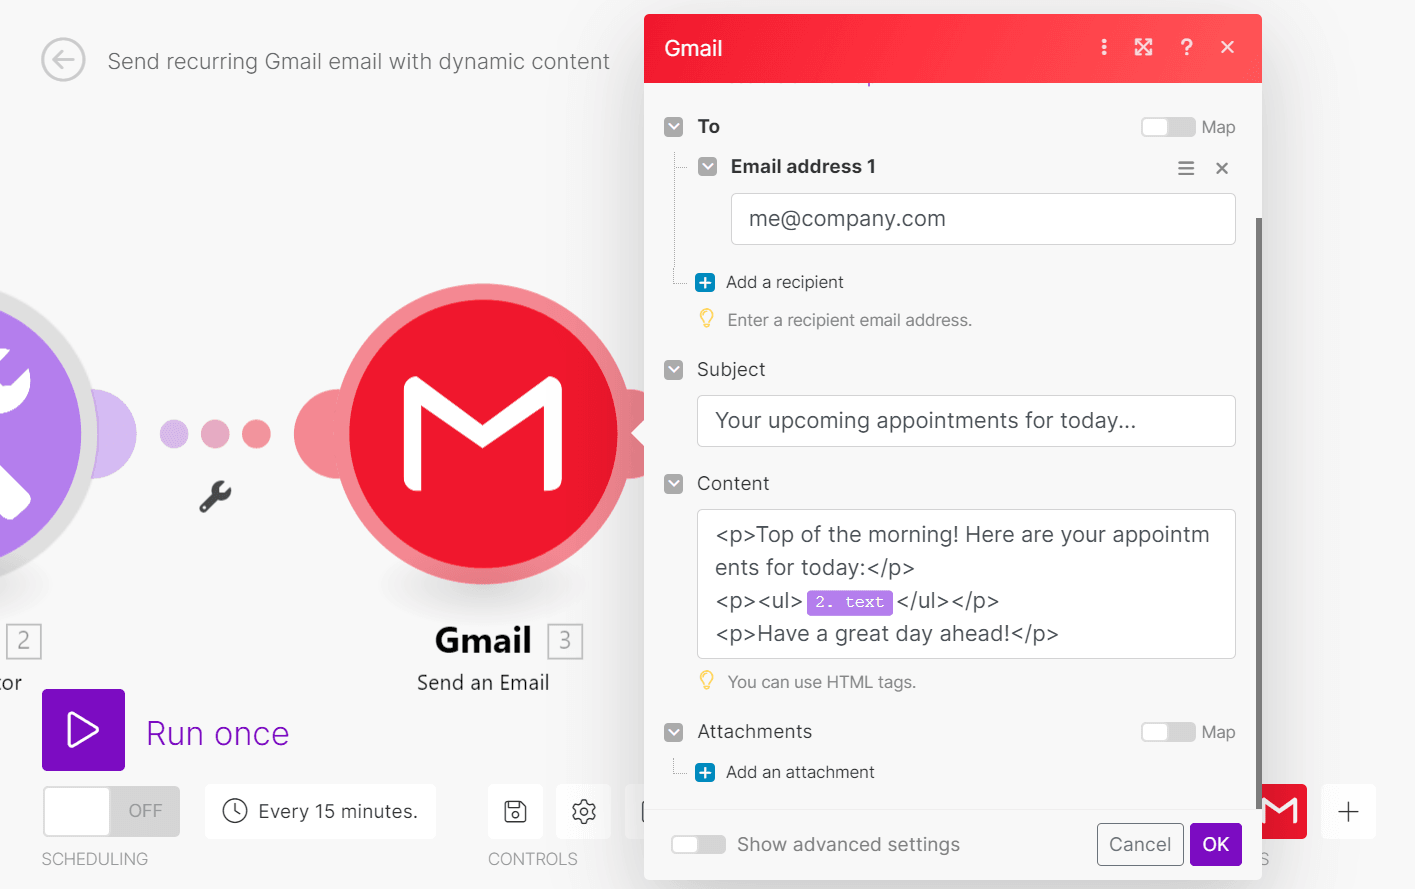 Send an Email in Gmail - dynamic content